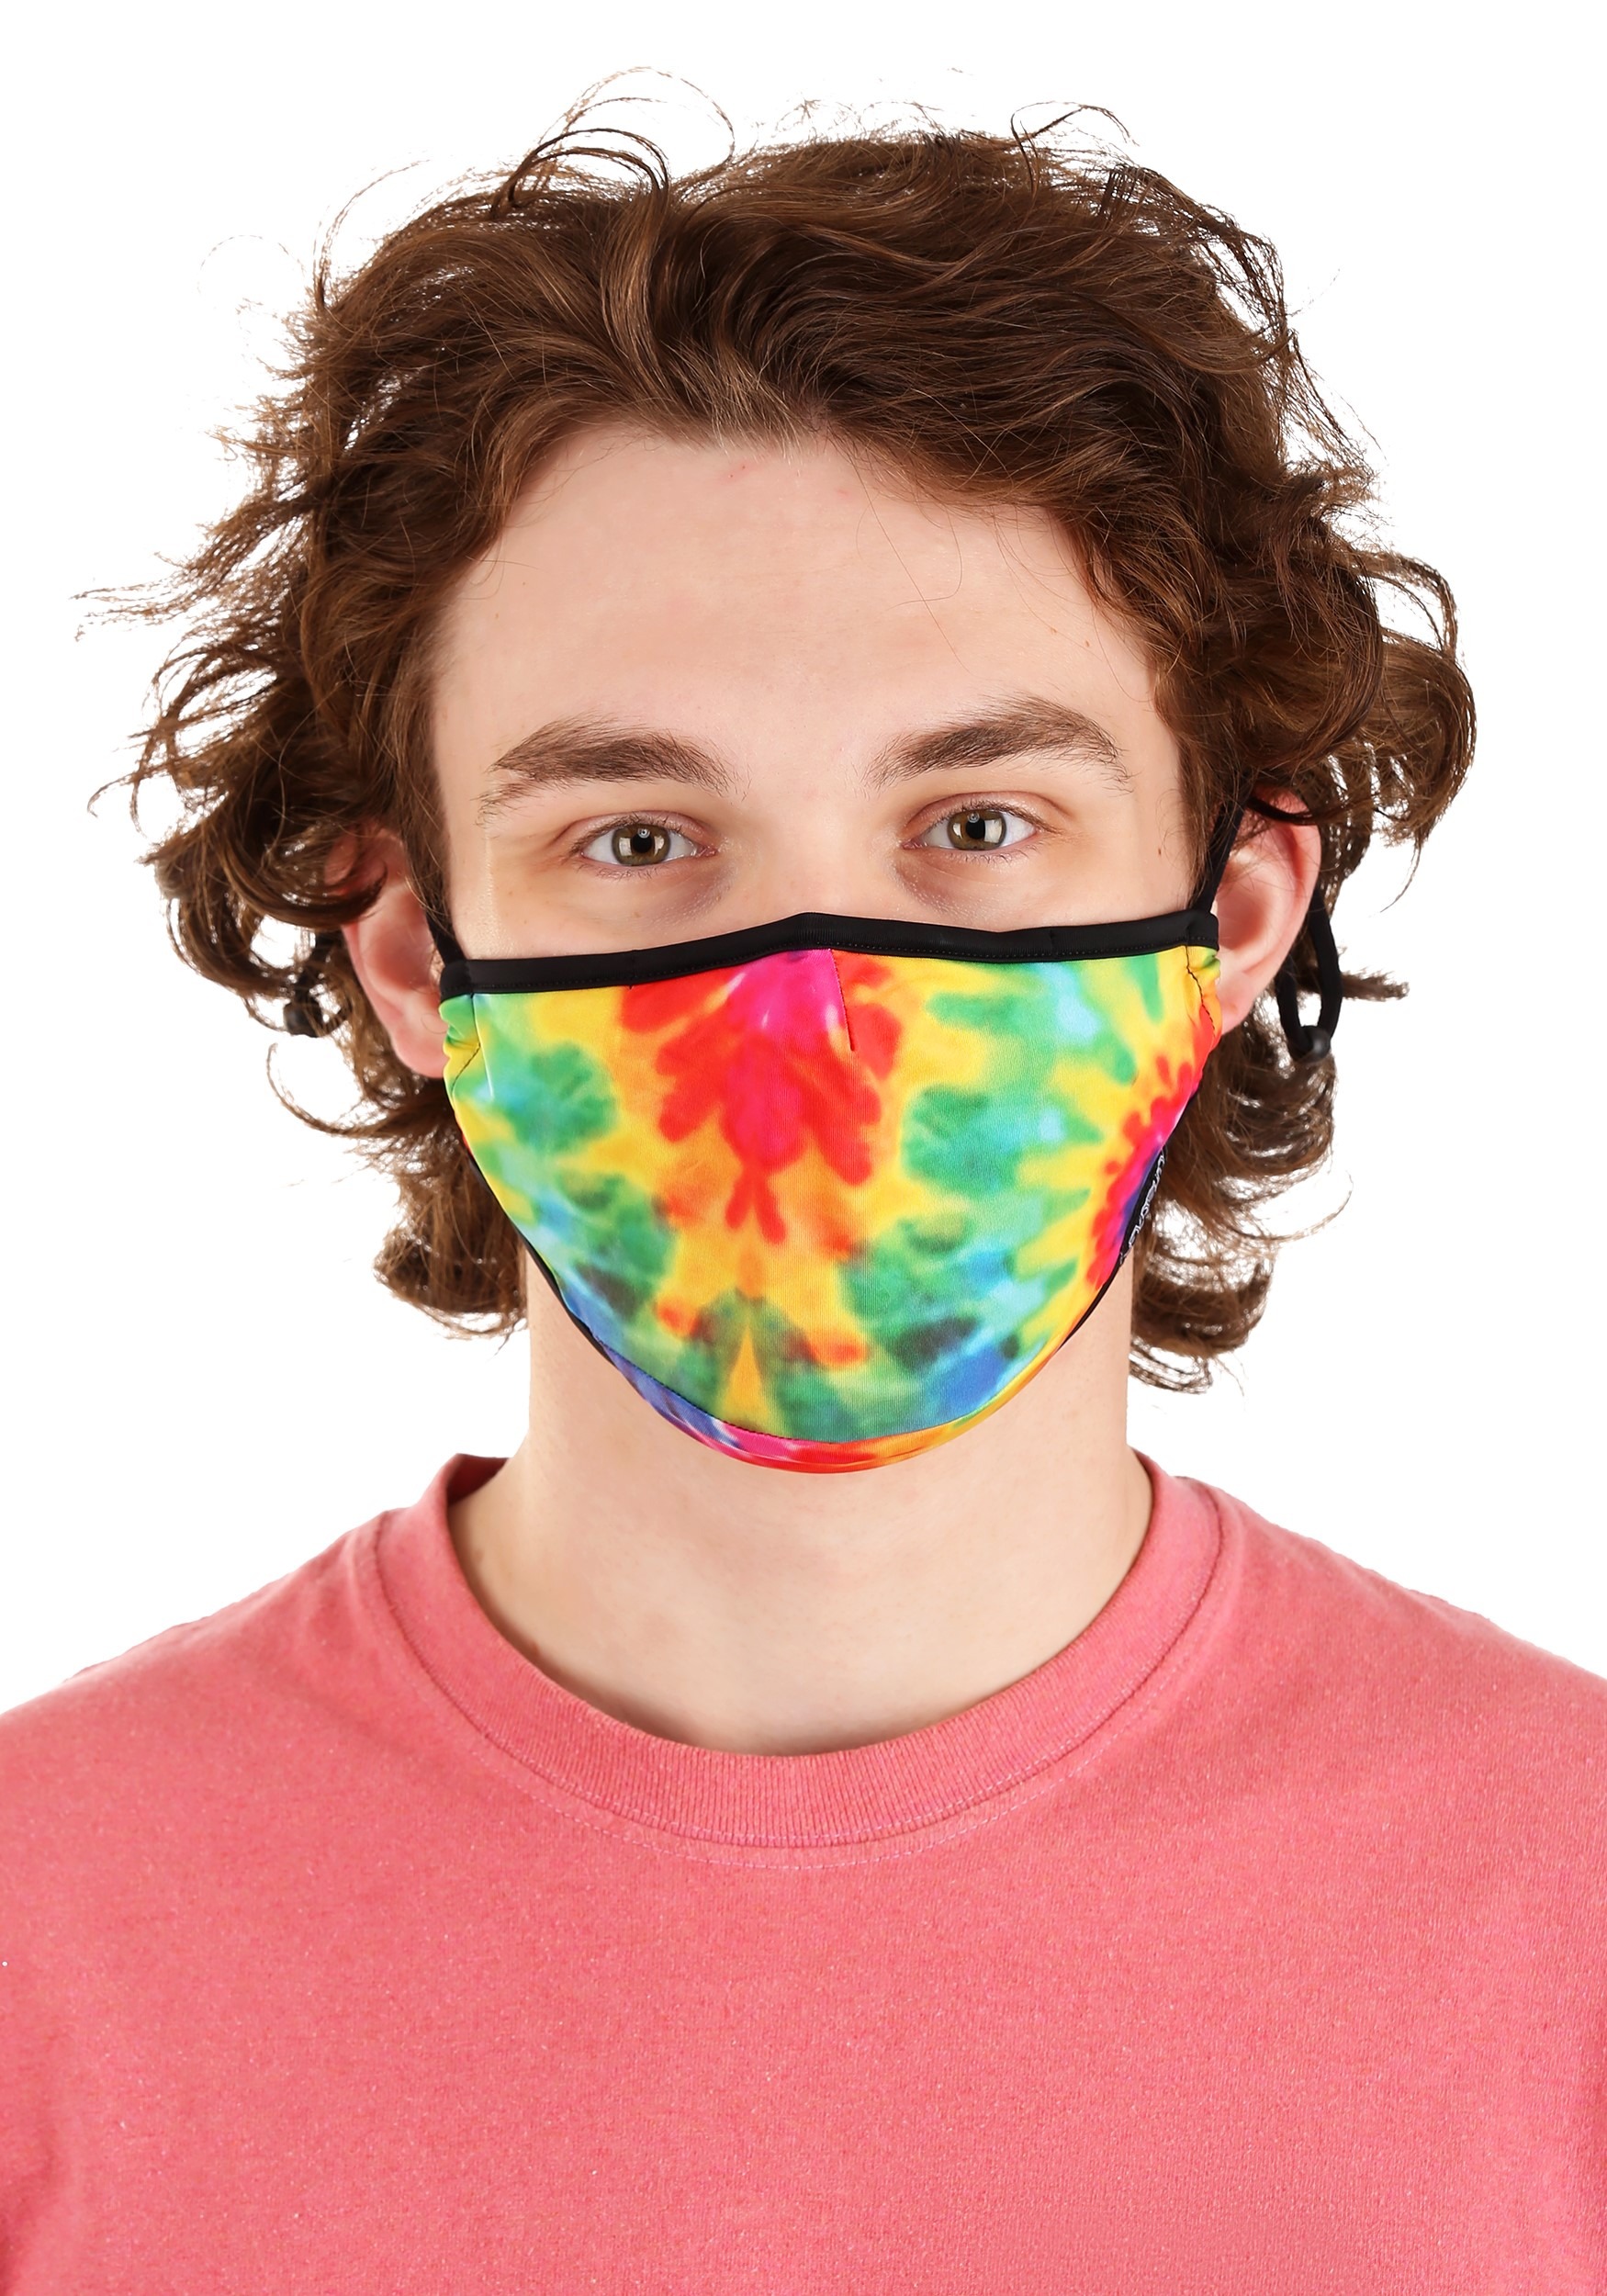 Protective Tie Dye Fabric Face Covering Mask